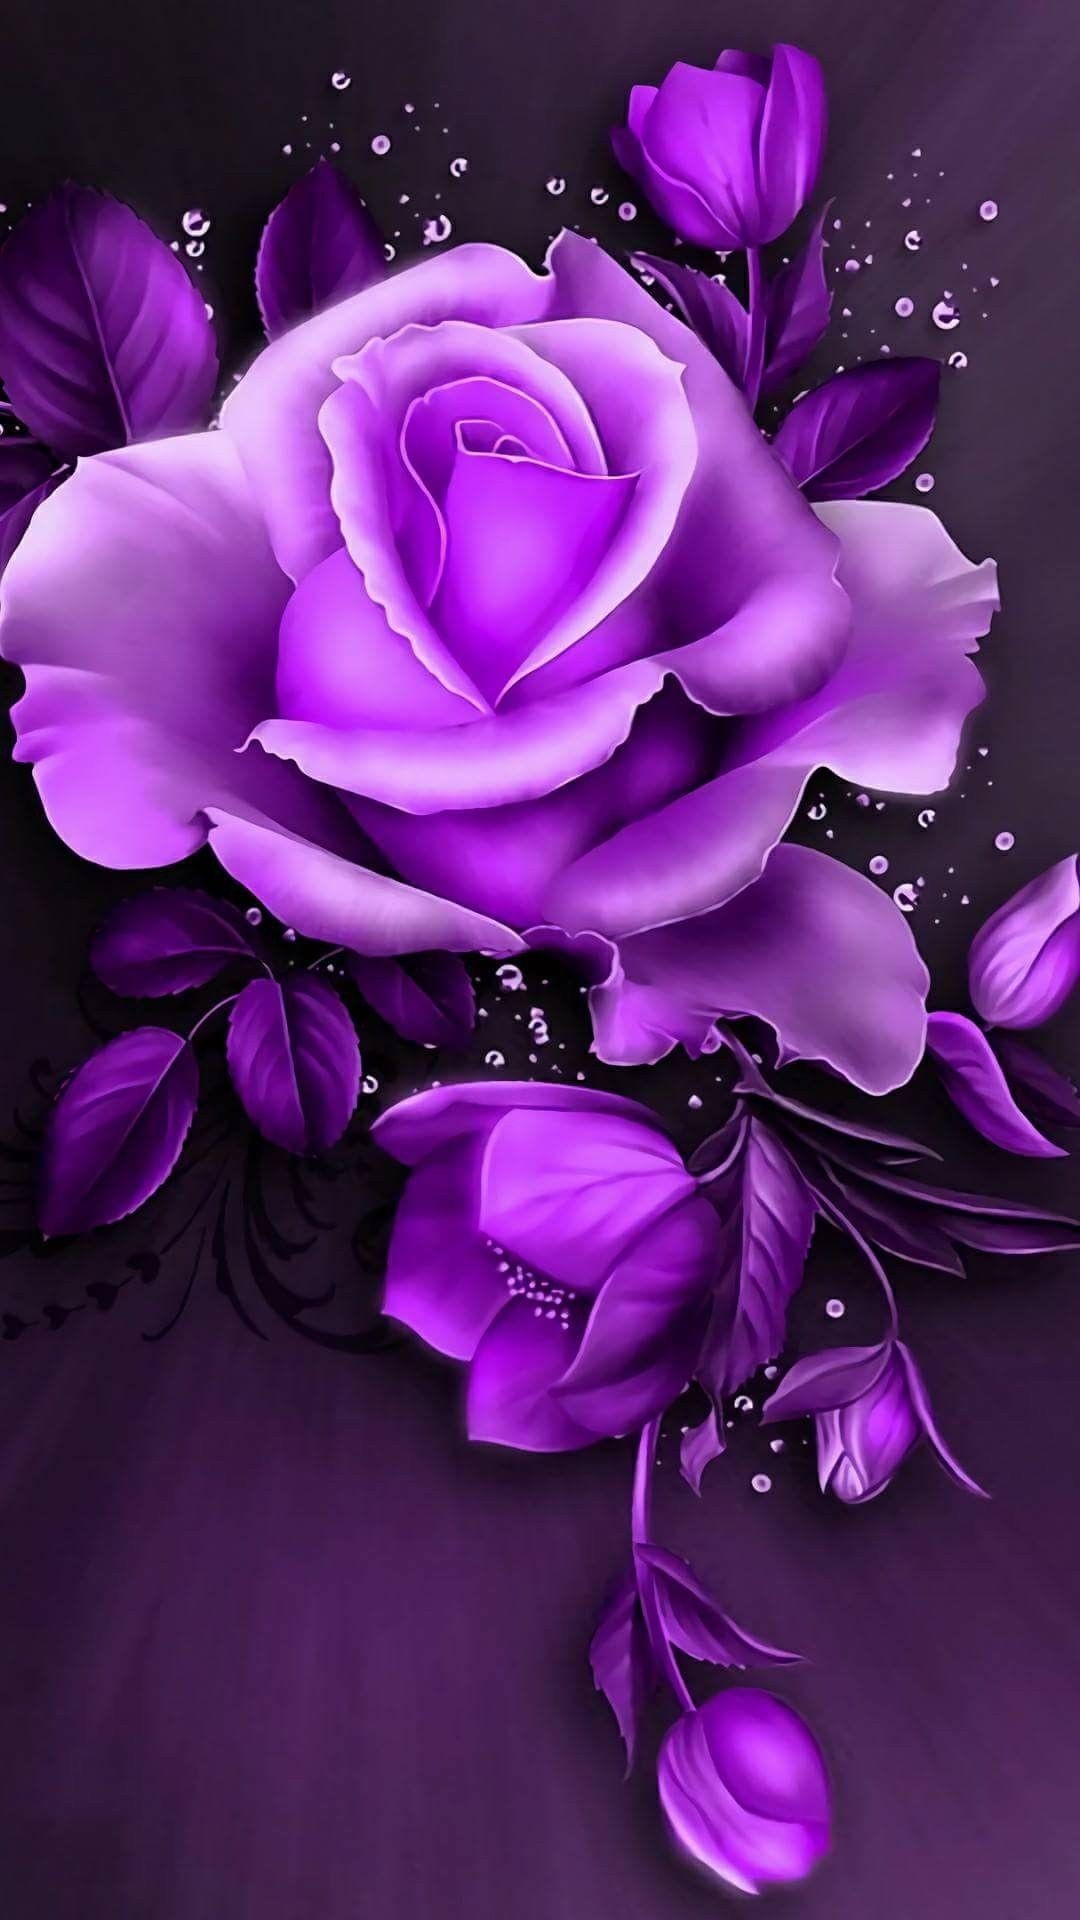 1080x1920 1920x1080 Beautiful Pink Rose Wallpapers Images